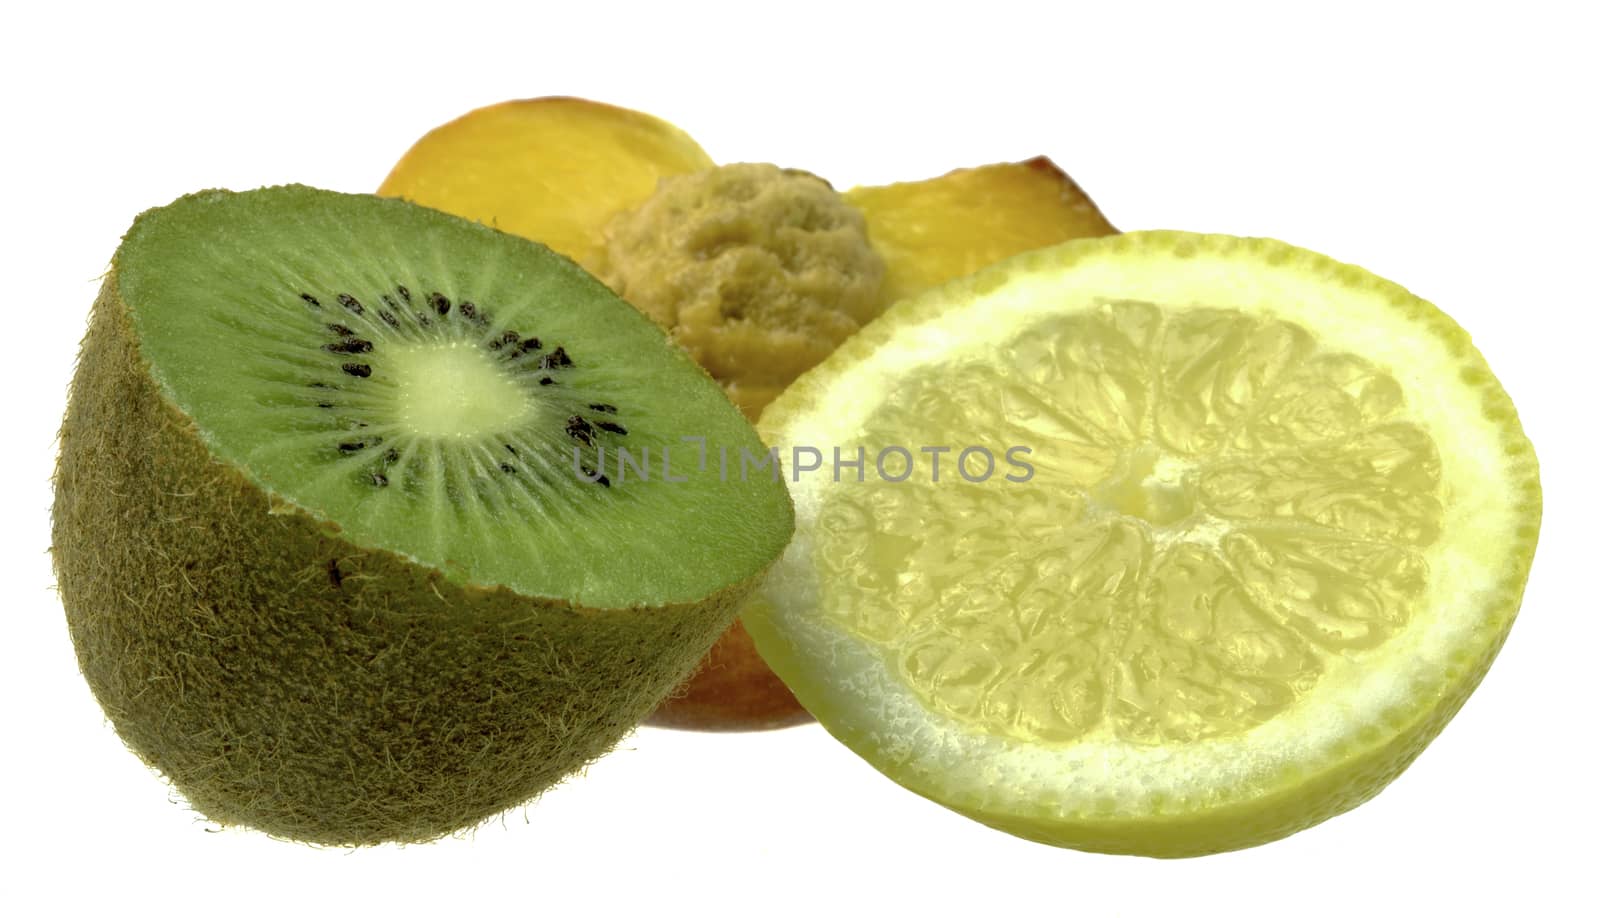 Peach, Kiwi and Lemon isolated on white background by gstalker